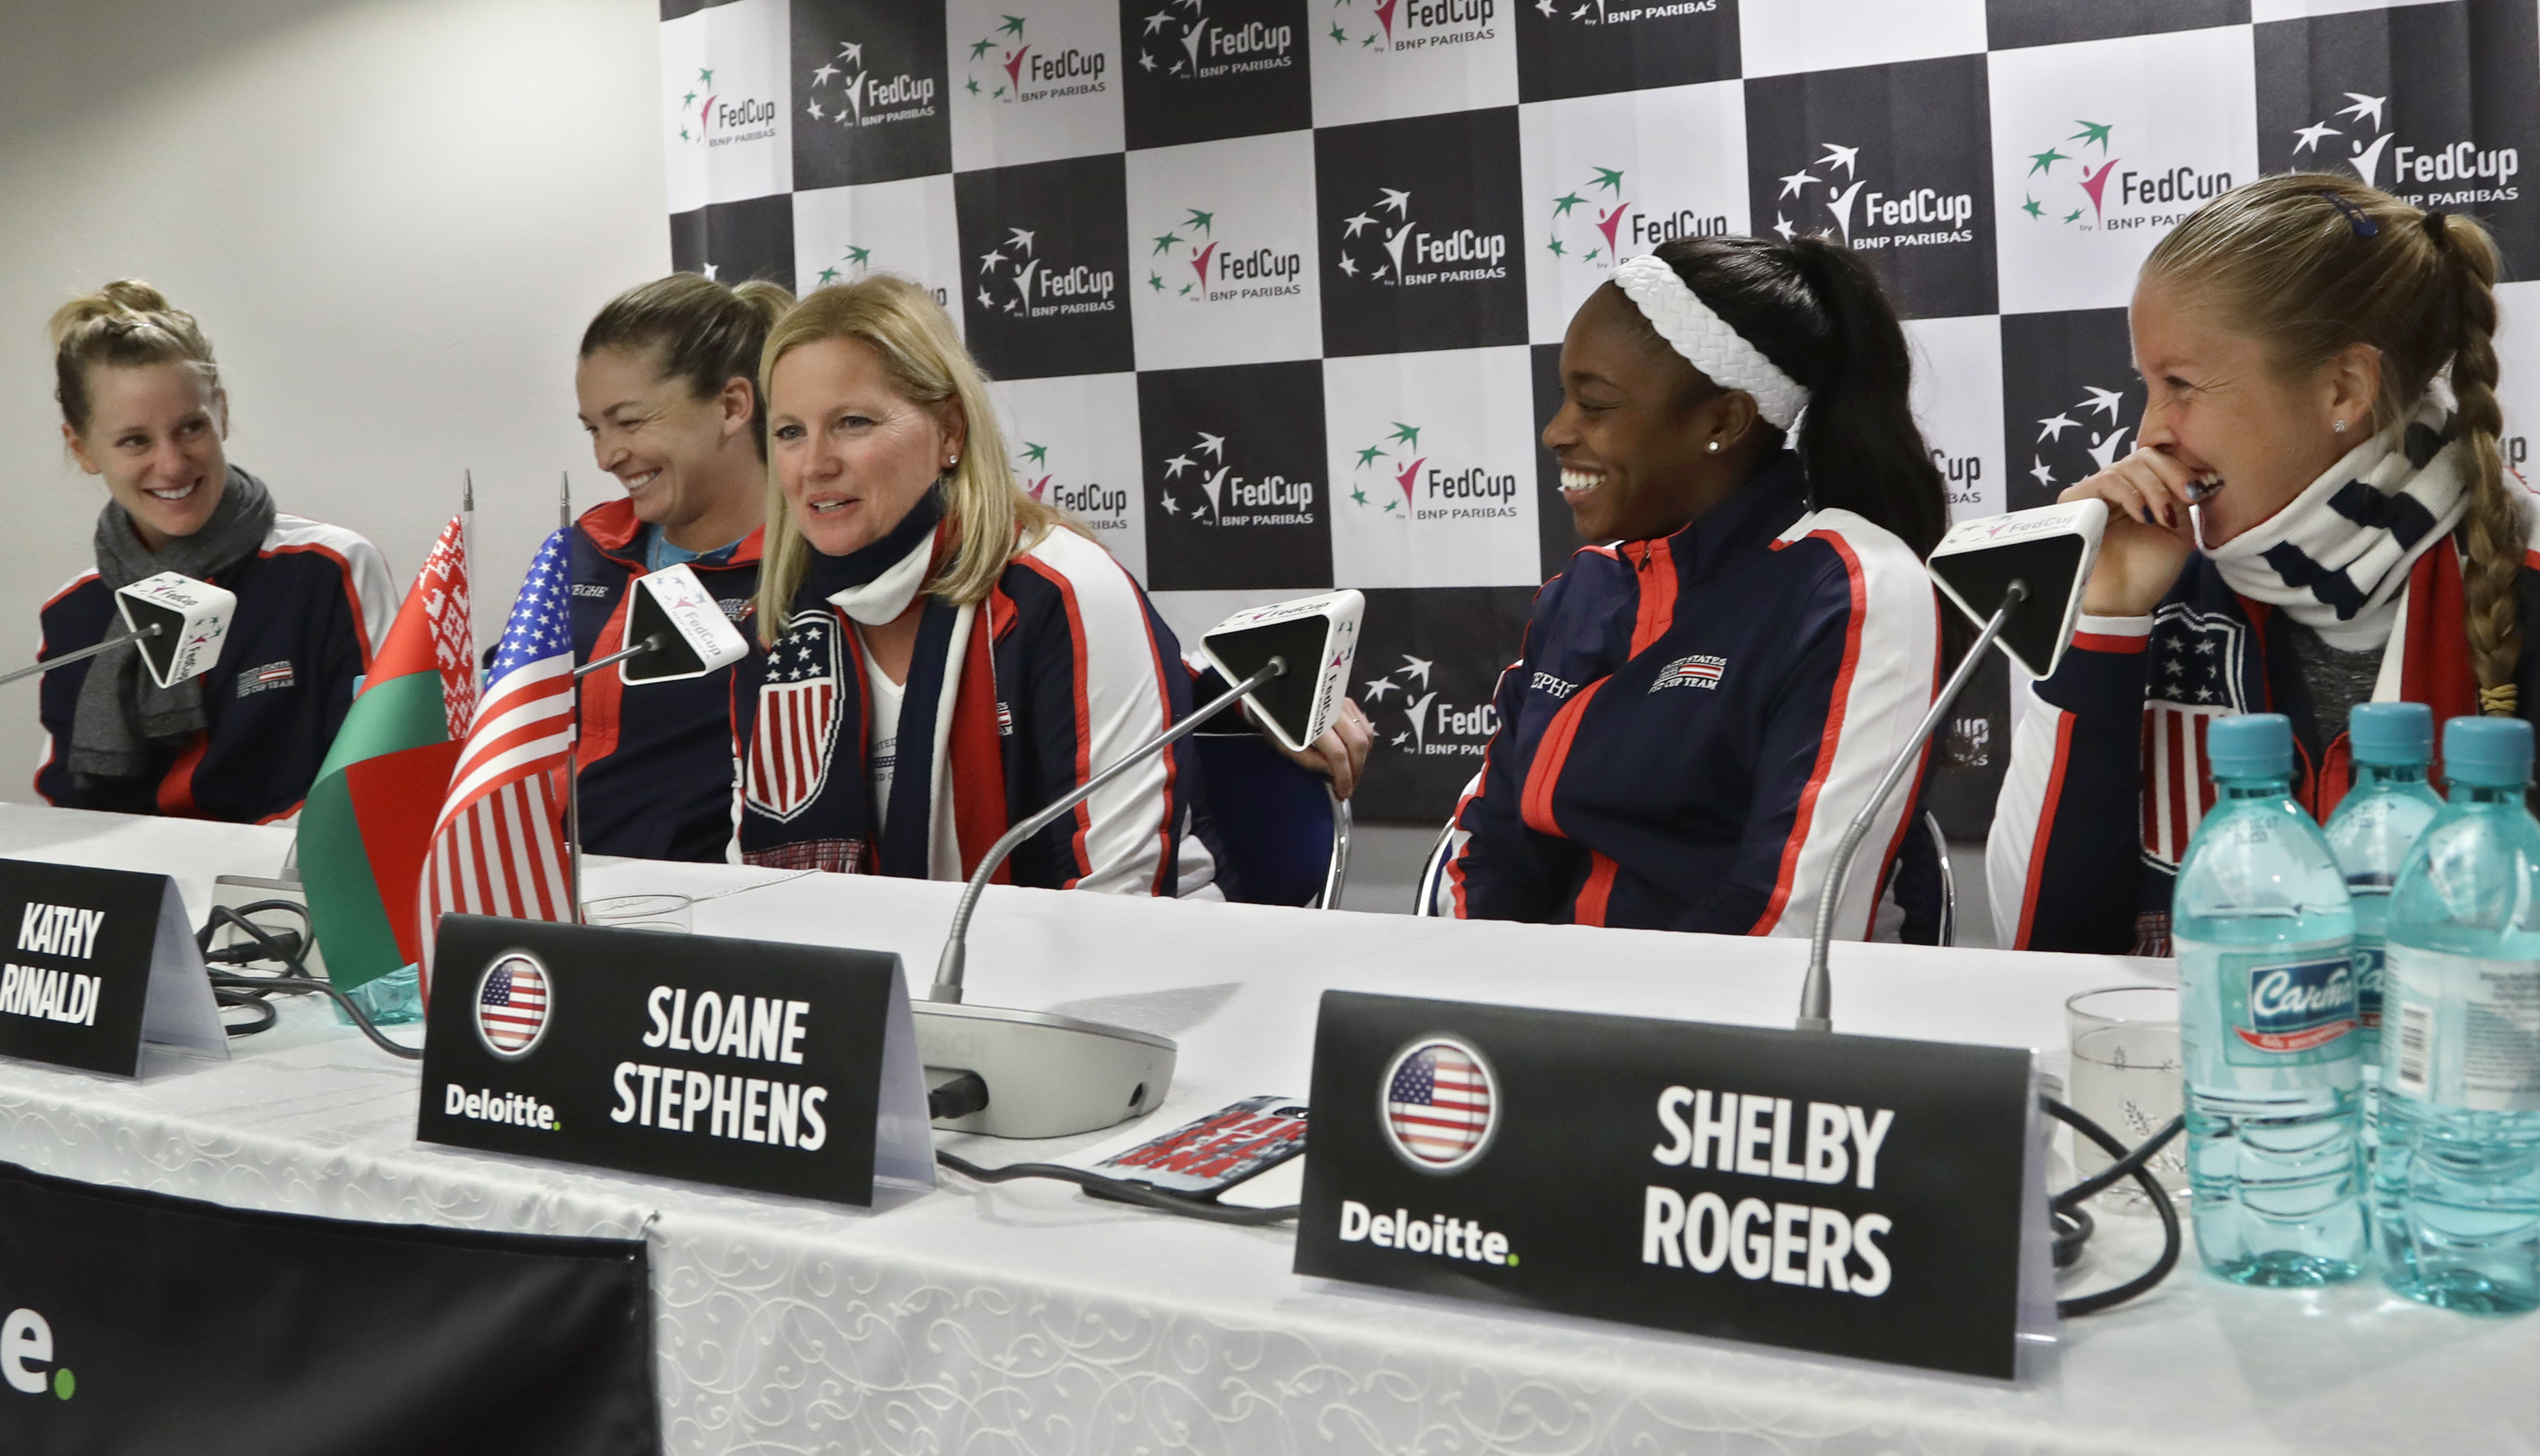 Support staff plays big role in US Fed Cup team success